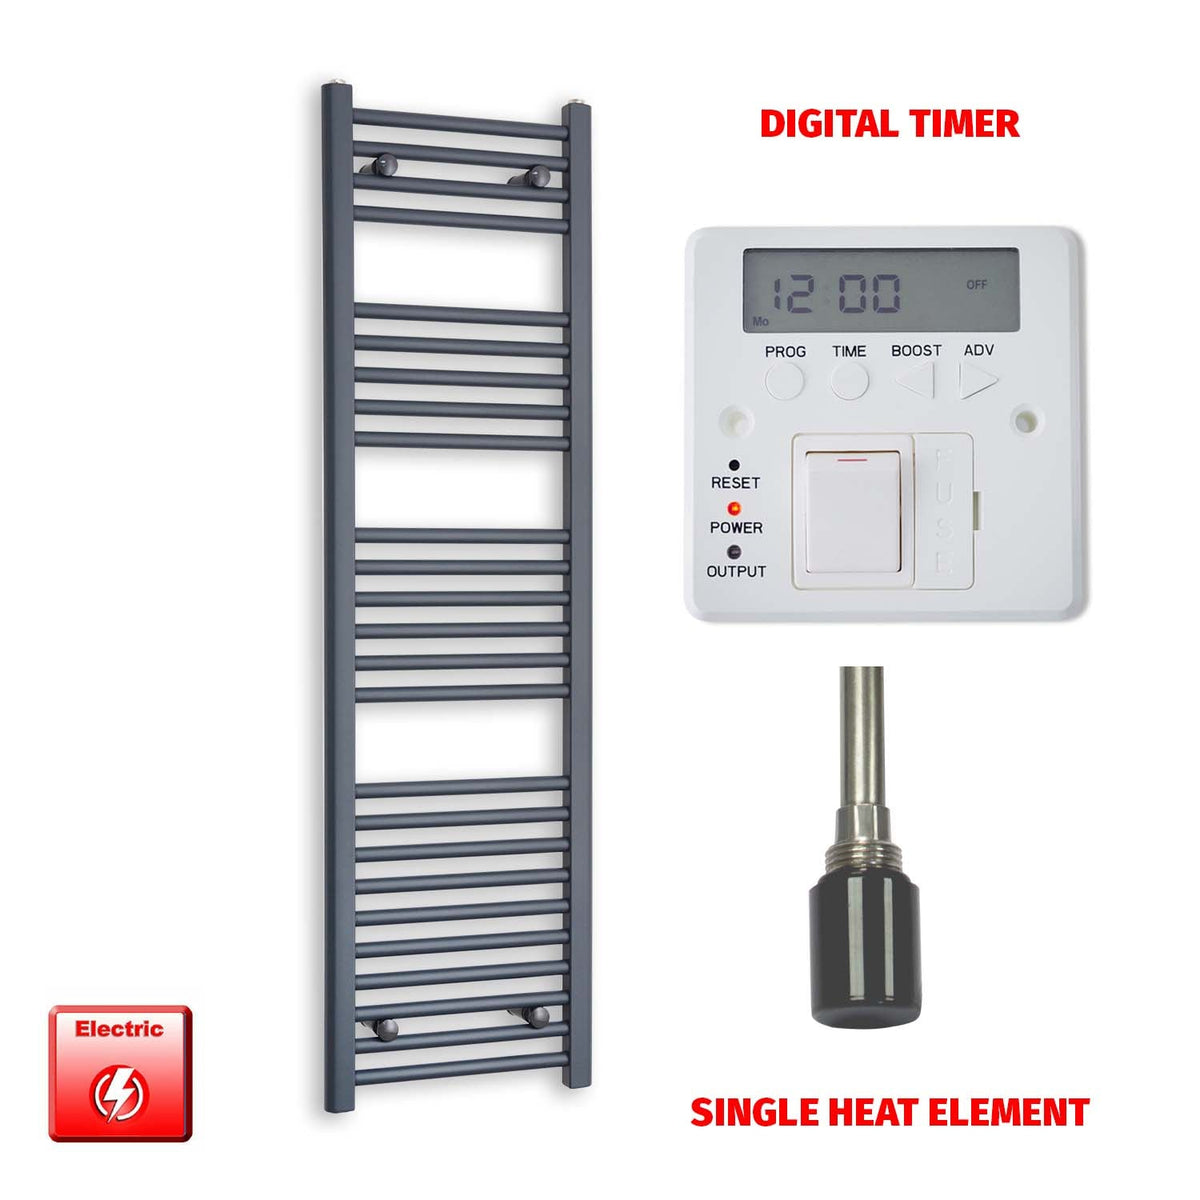 1400mm High 400mm Wide Flat Anthracite Pre-Filled Electric Heated Towel Radiator Single heat element Digital timer